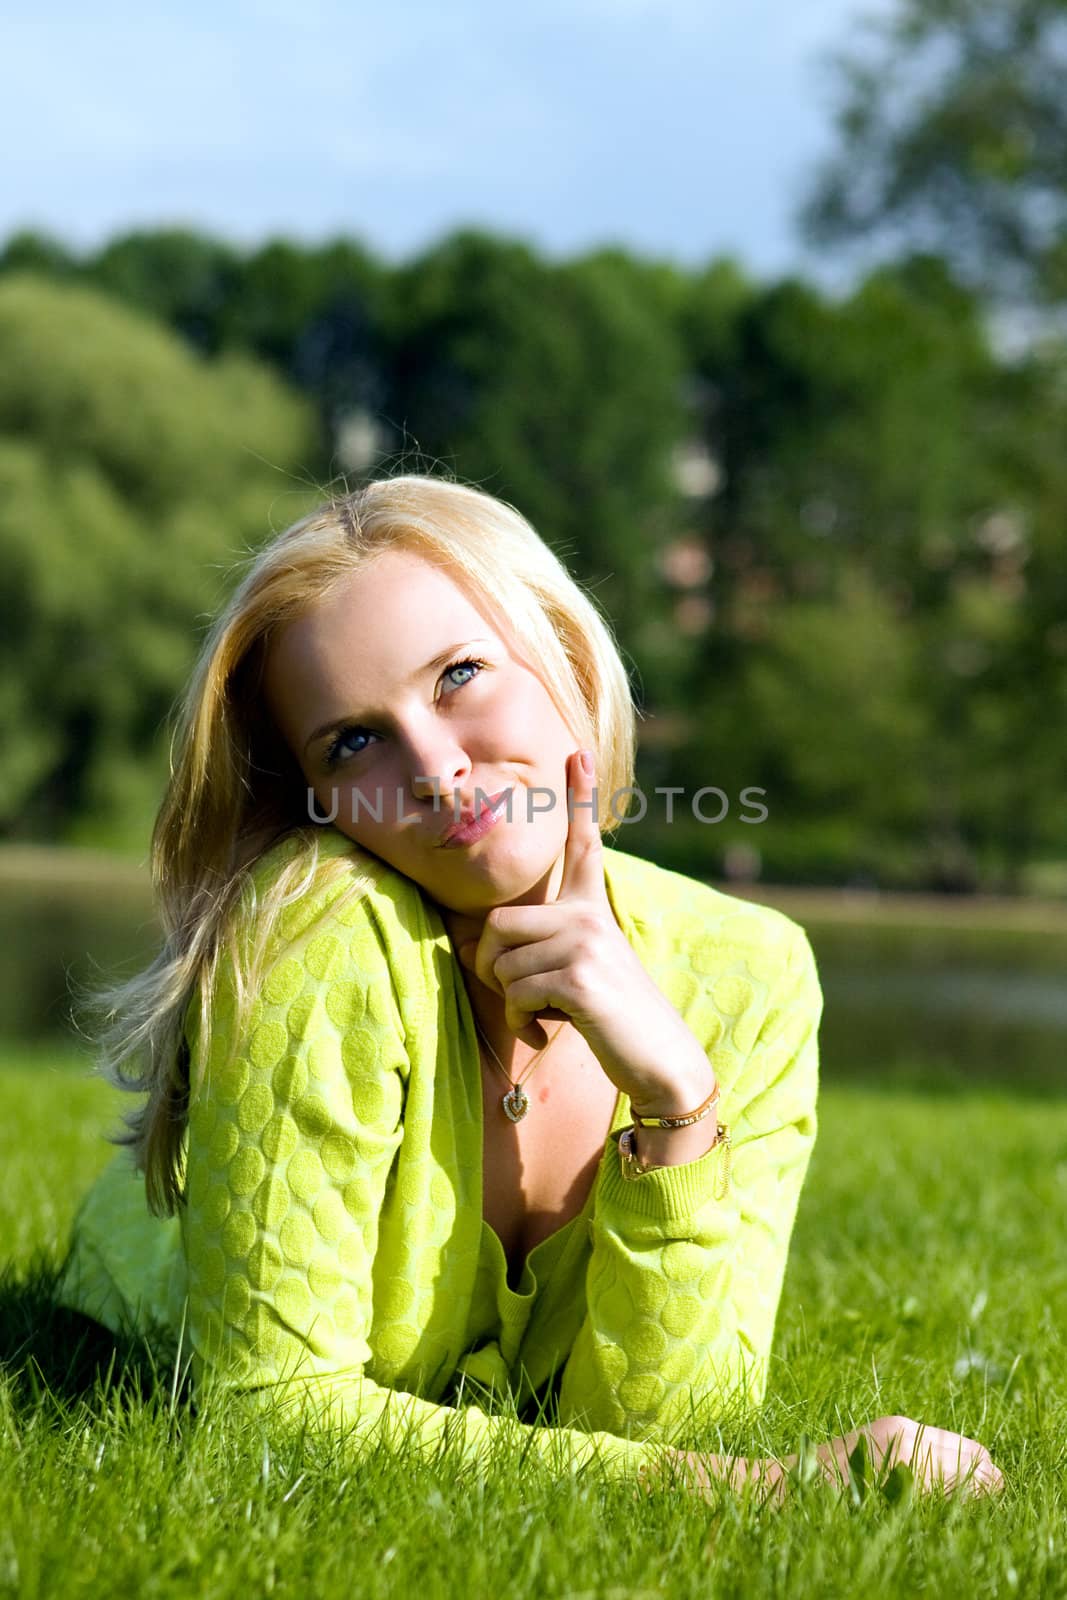 The girl lays on a grass a meadow